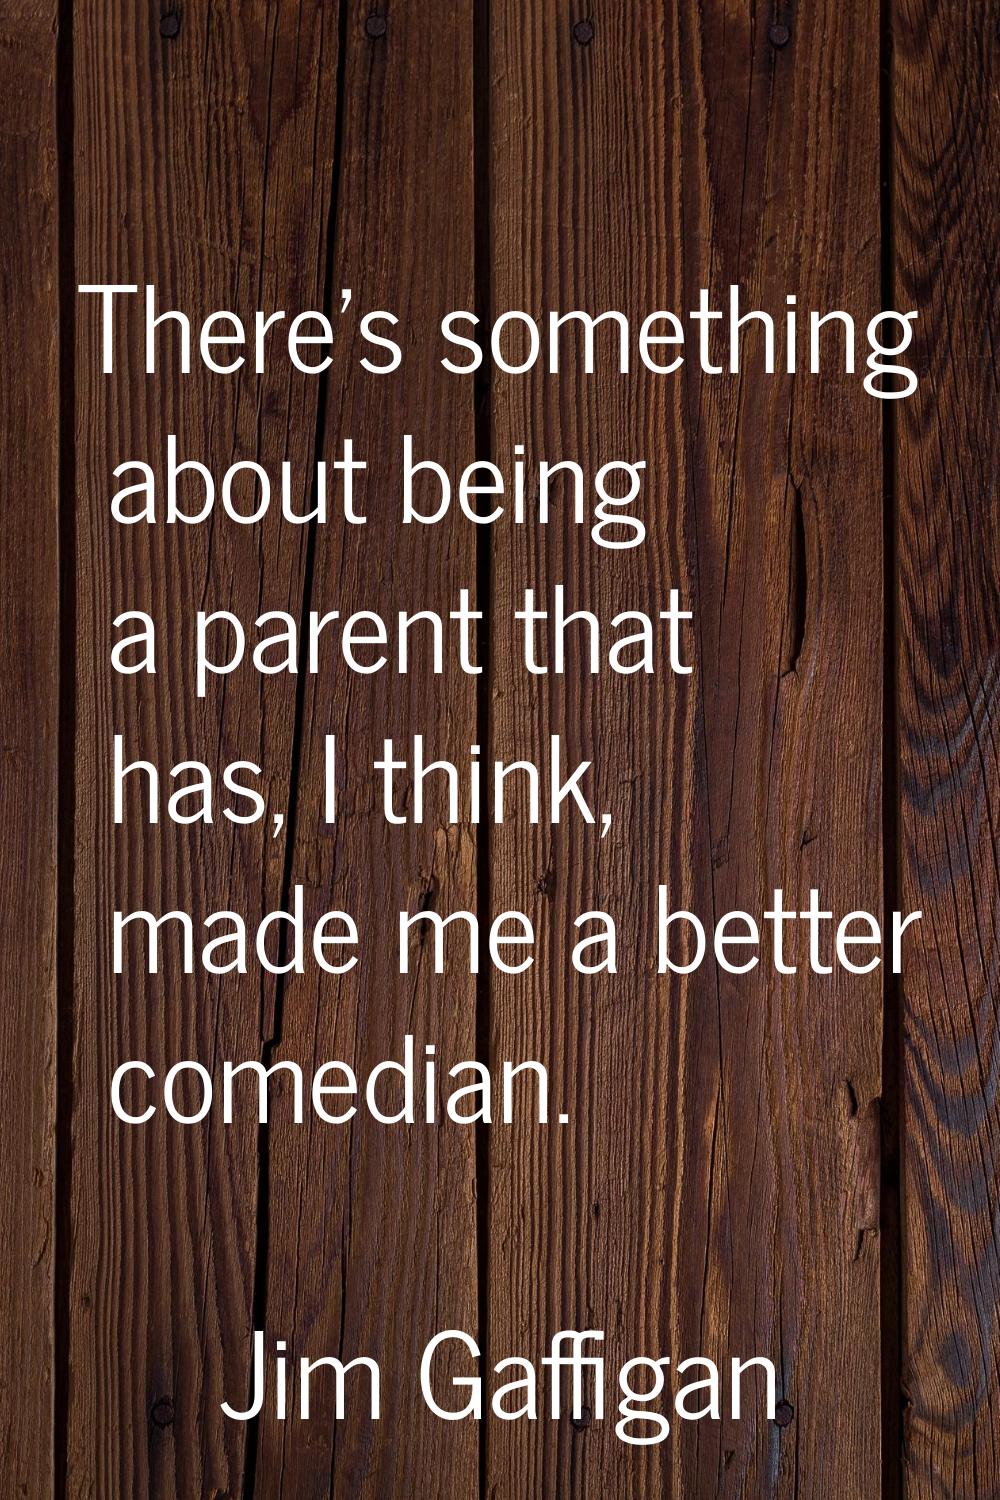 There's something about being a parent that has, I think, made me a better comedian.